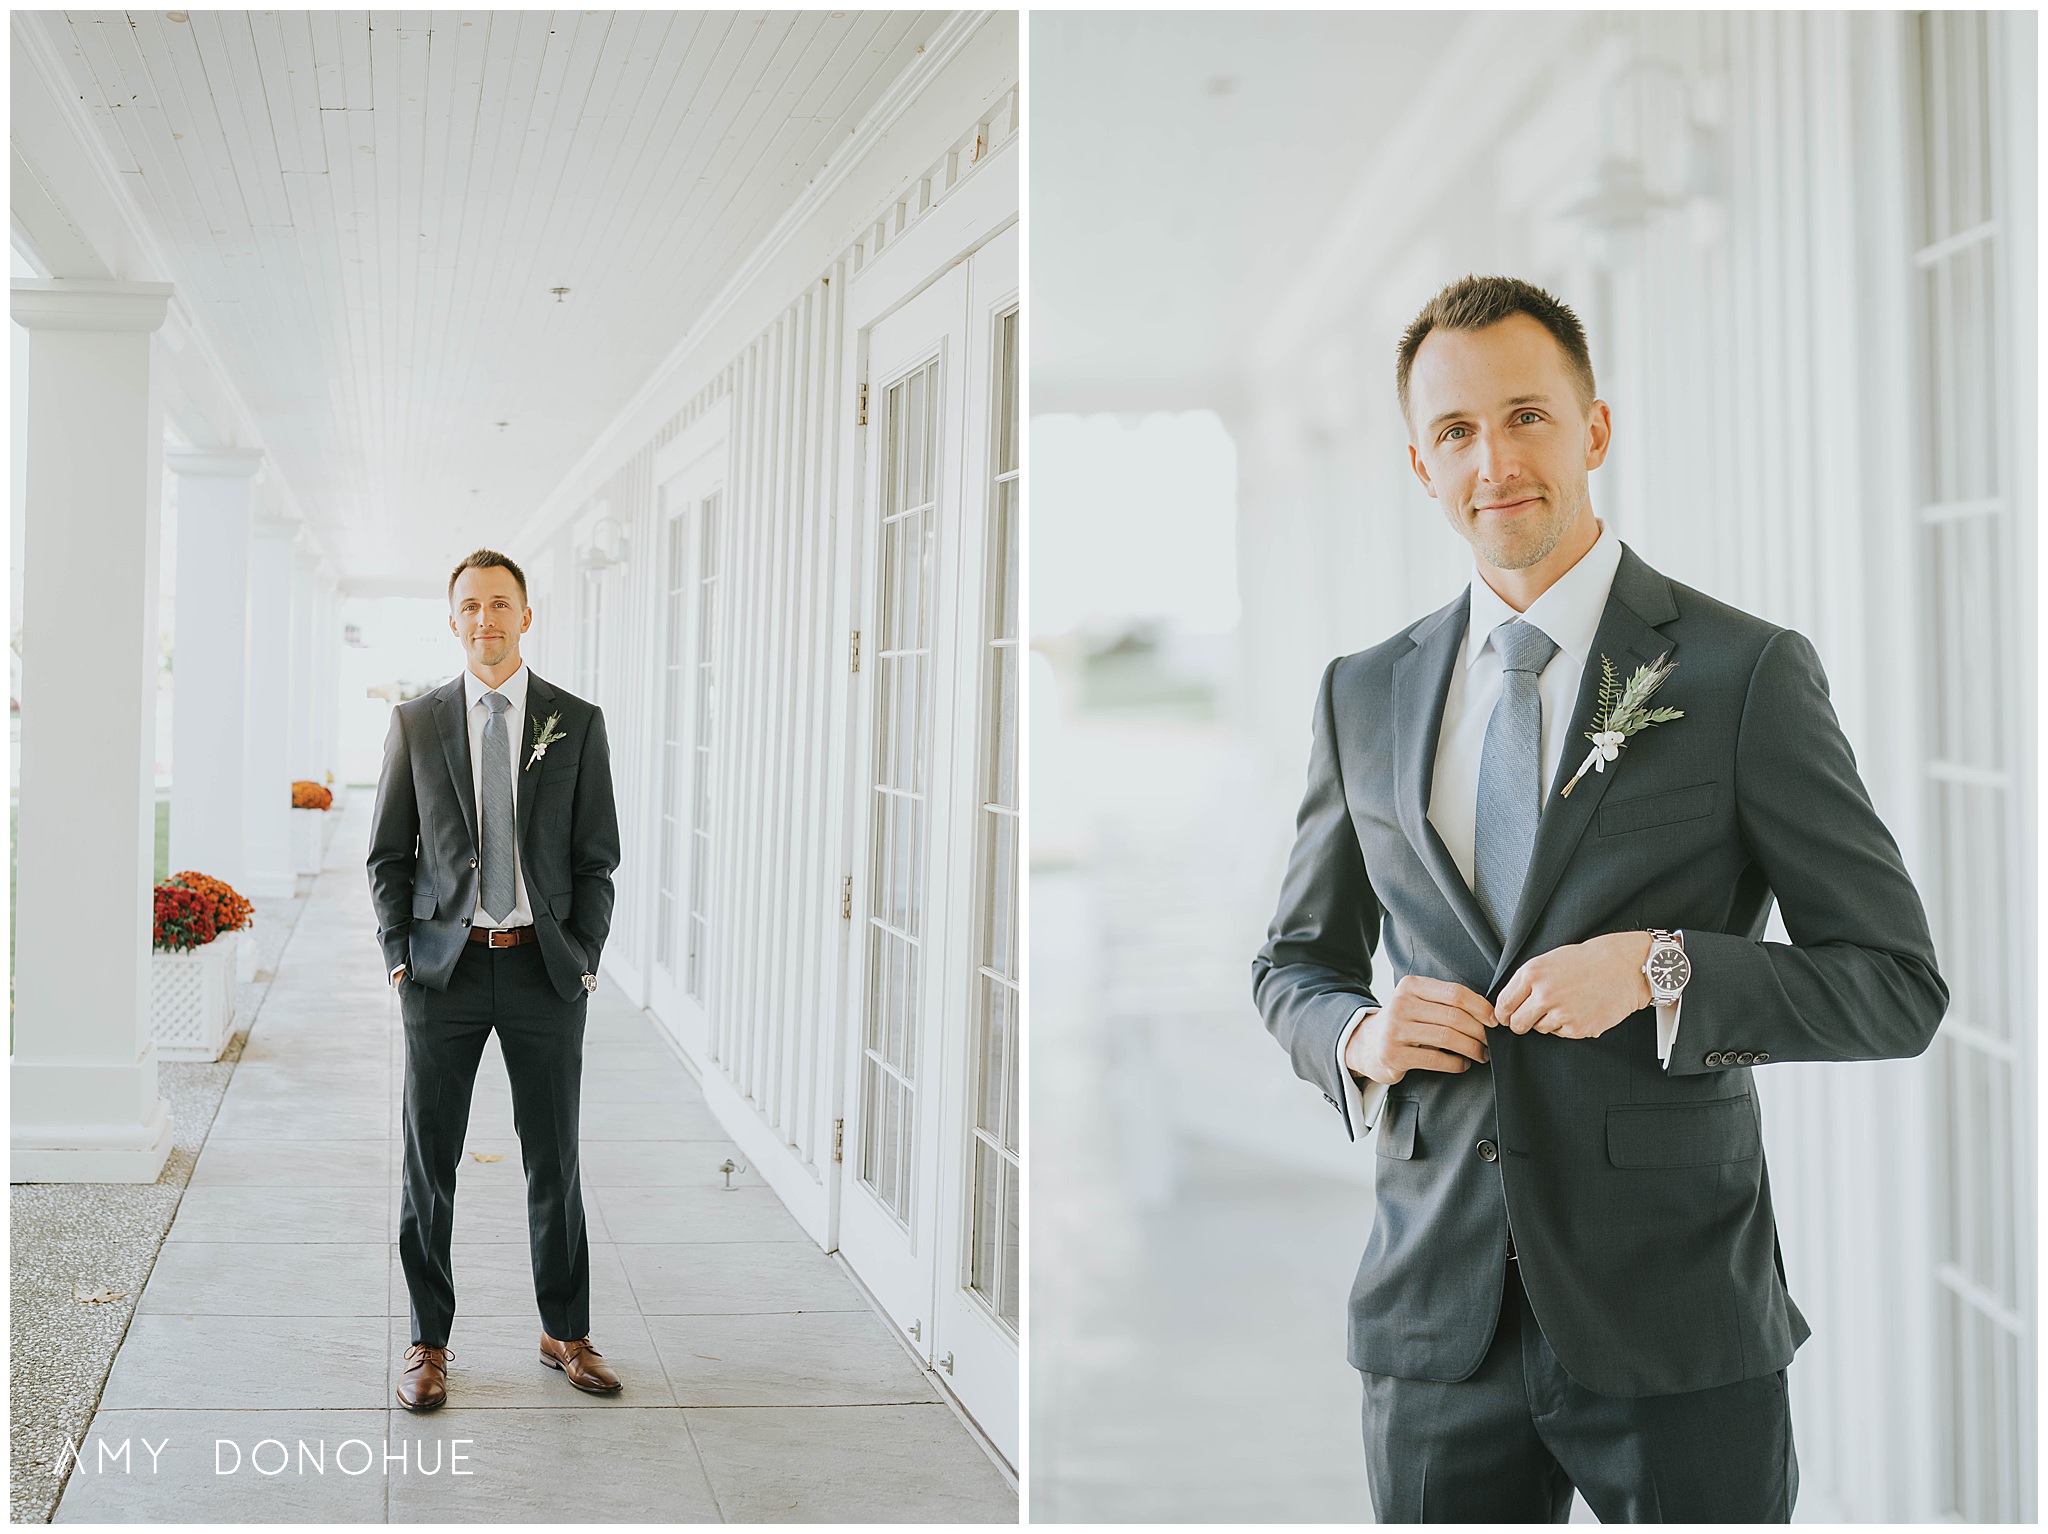 Bride and groom portraits at the Equinox Resort Wedding | Vermont Wedding Photographer | © Amy Donohue Photography